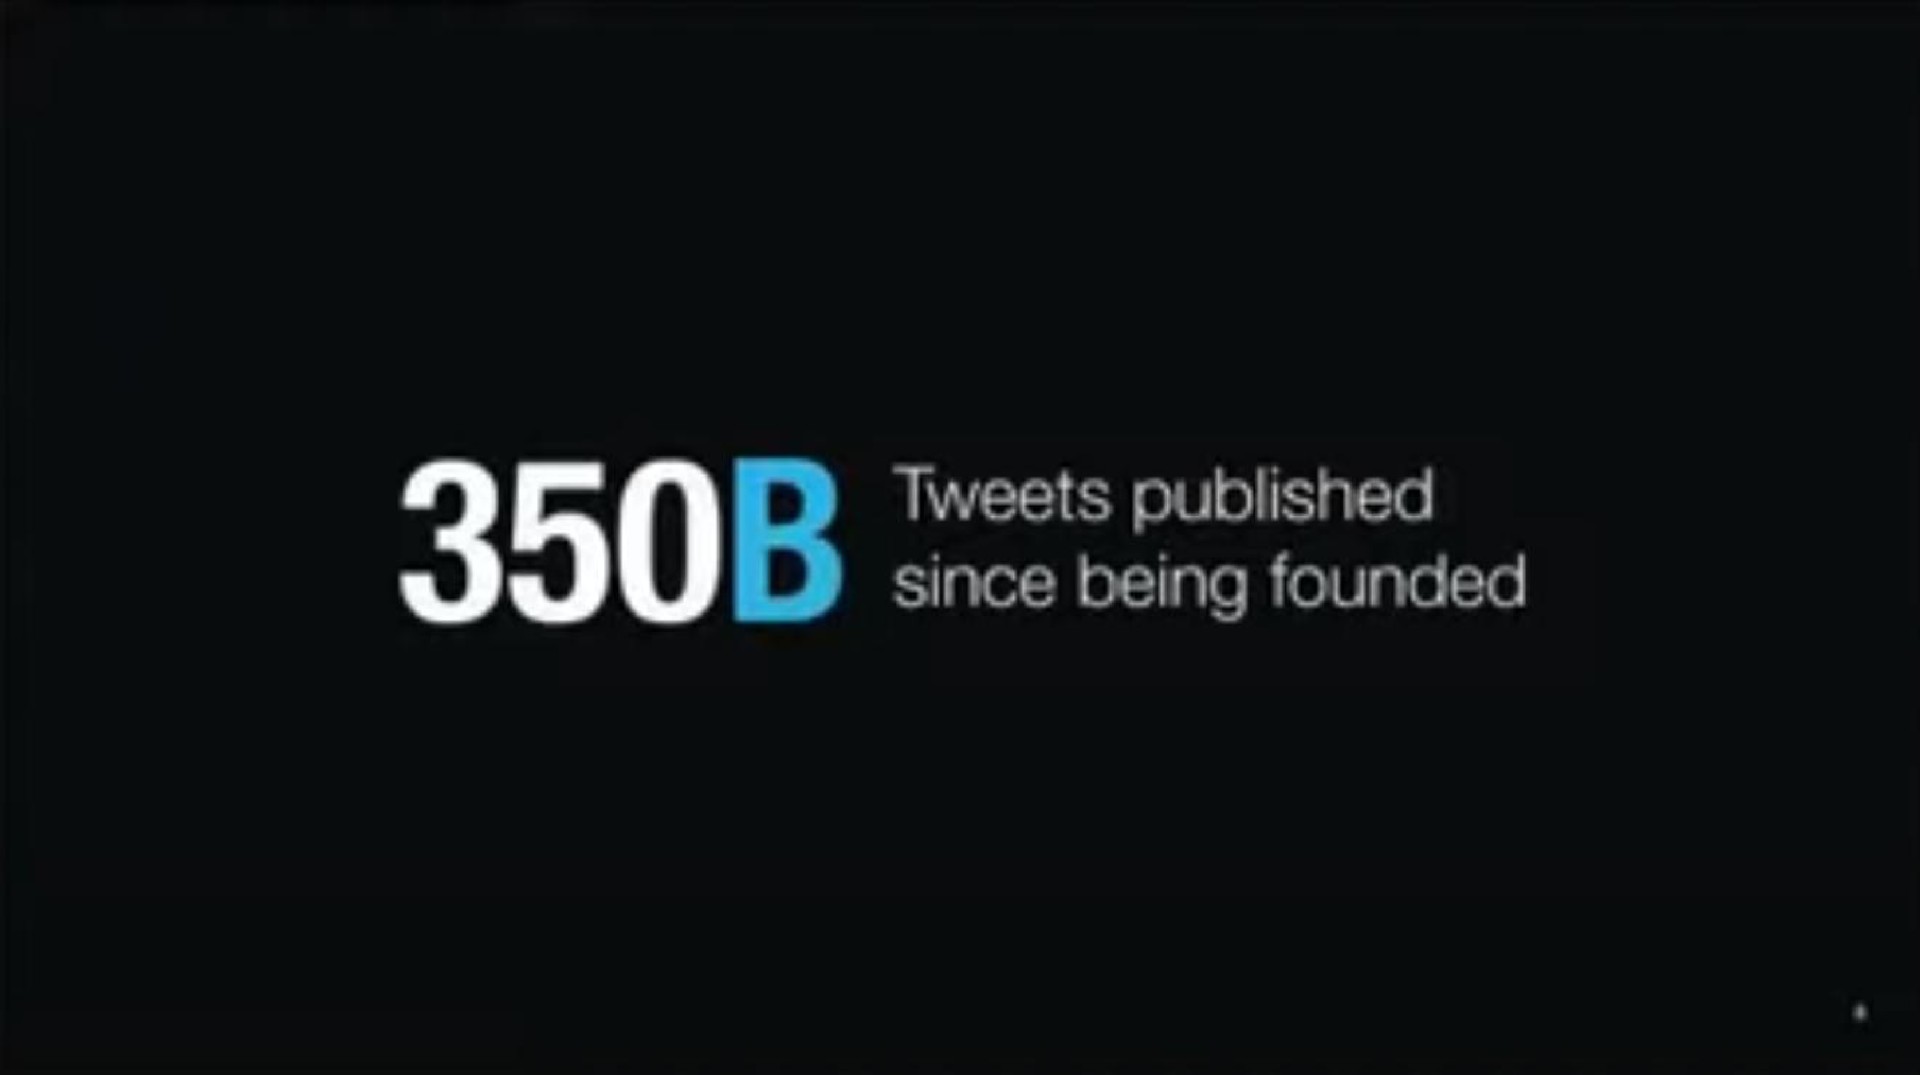 tweets published since being founded | Twitter